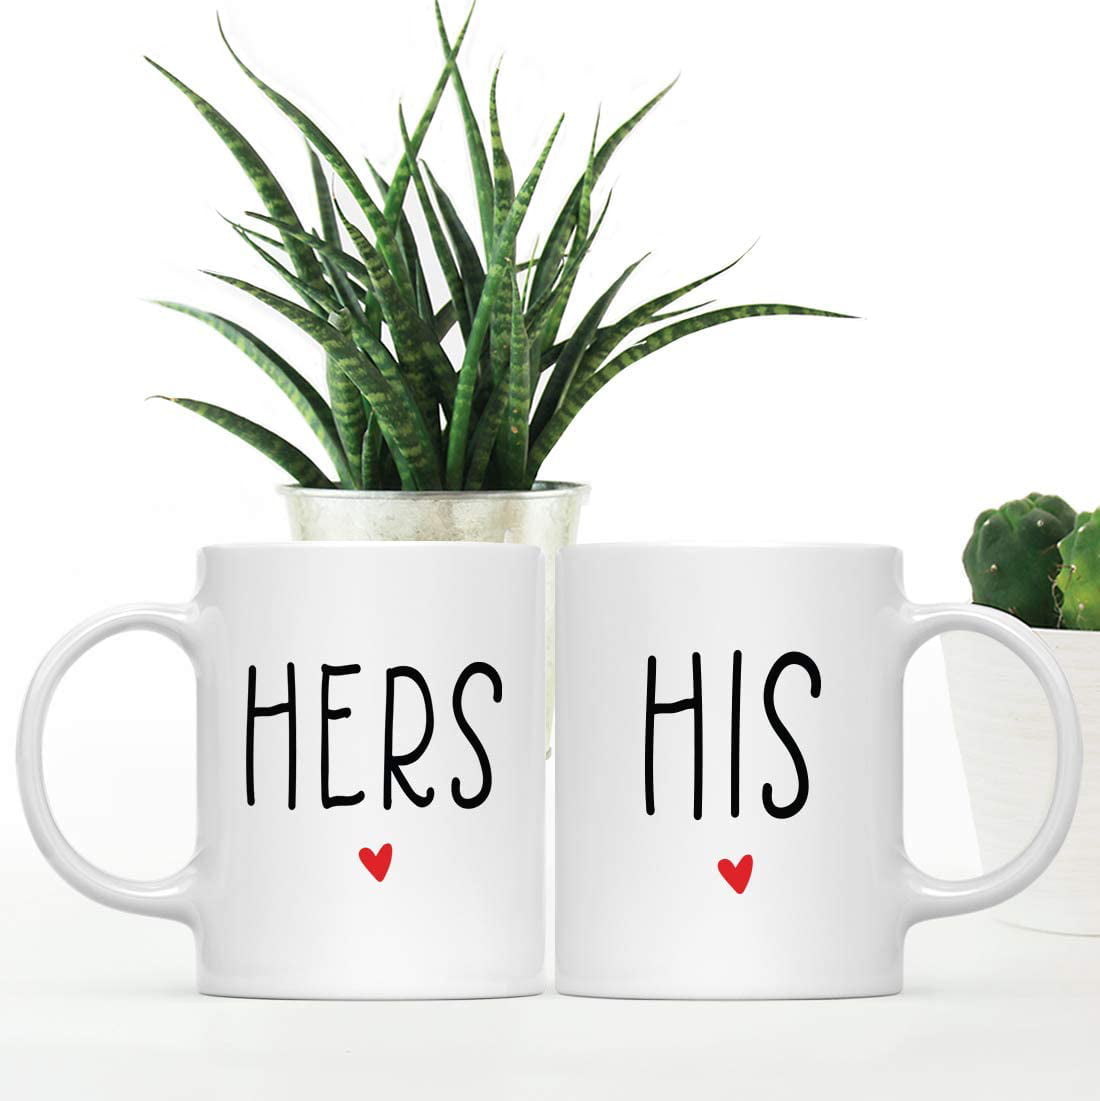 Couple Mug Personalized I Said Yes Matching Coffee Mug Cups 11oz 15oz Anniversary Valentine's Day Christmas Engagement Wedding Gifts for Wife Future